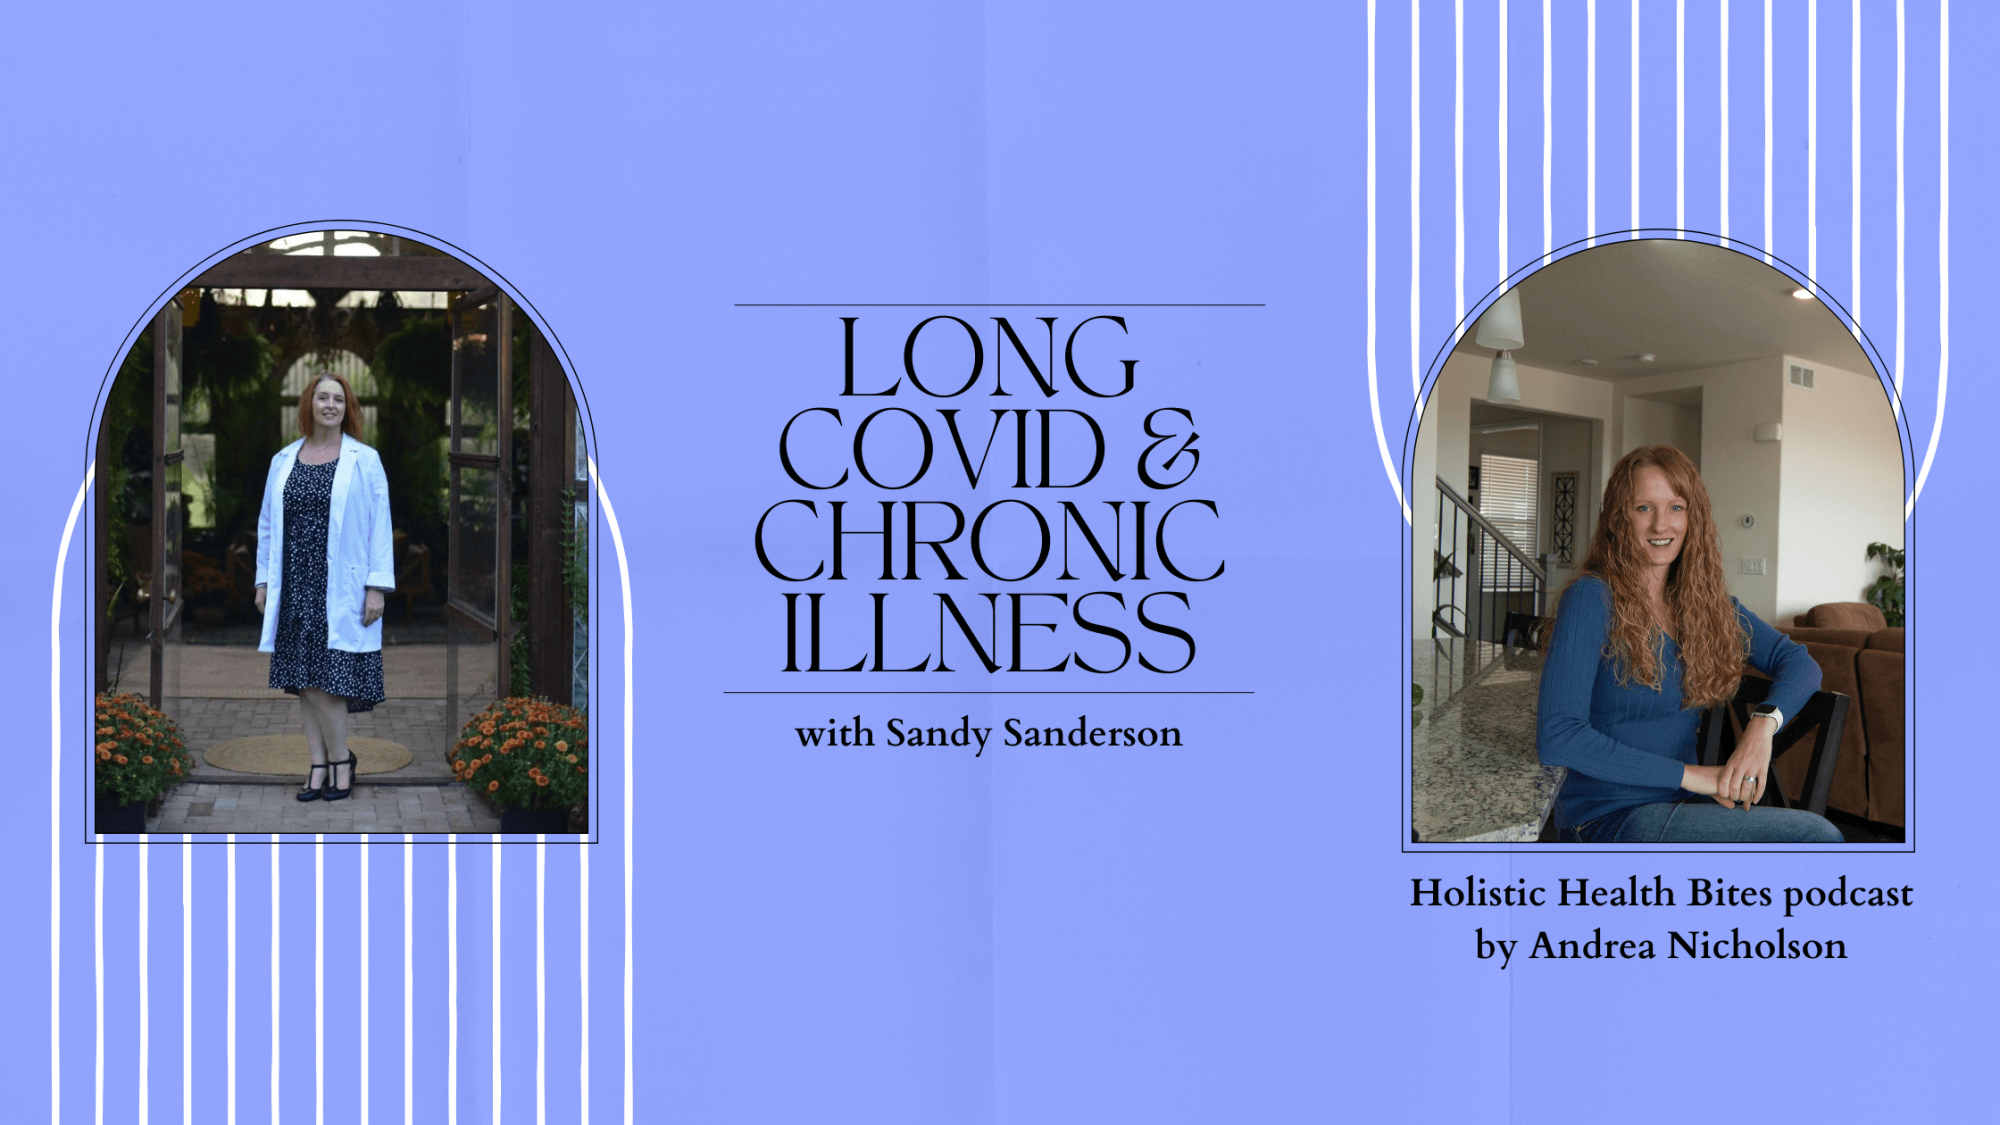 Long COVID and Chronic Illness by Sandy Sanderson, interview by Functional Nutritionist Andrea Nicholson